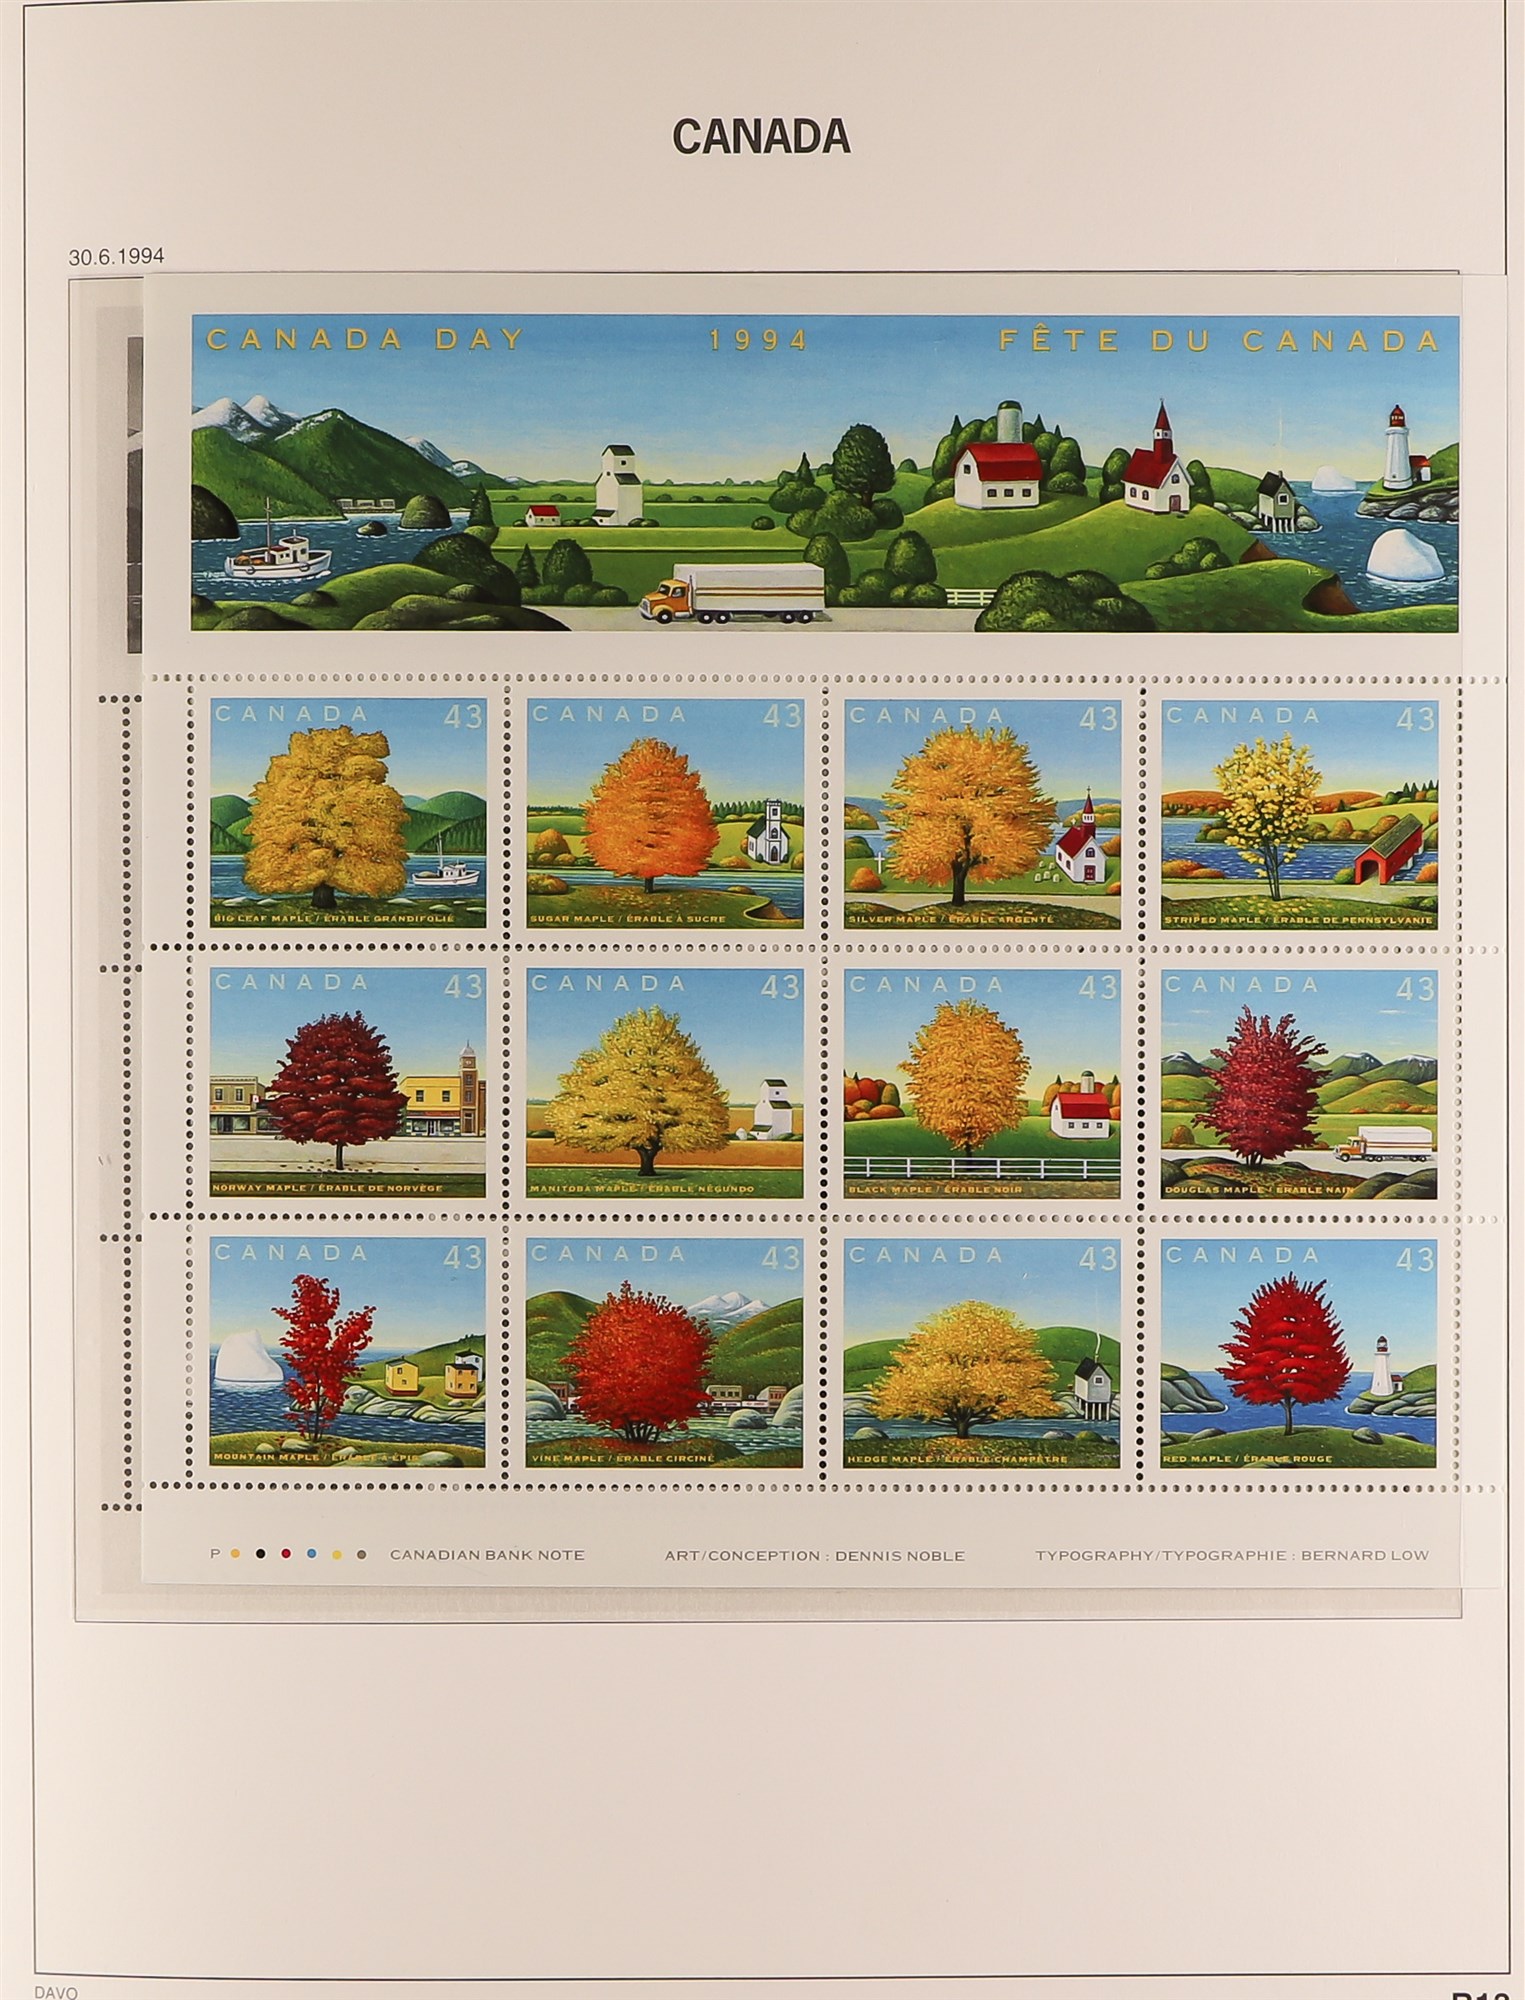 CANADA 1990 - 2002 NEVER HINGED MINT COLLECTION in DAVO Canada hingeless album, largely complete ( - Image 10 of 13